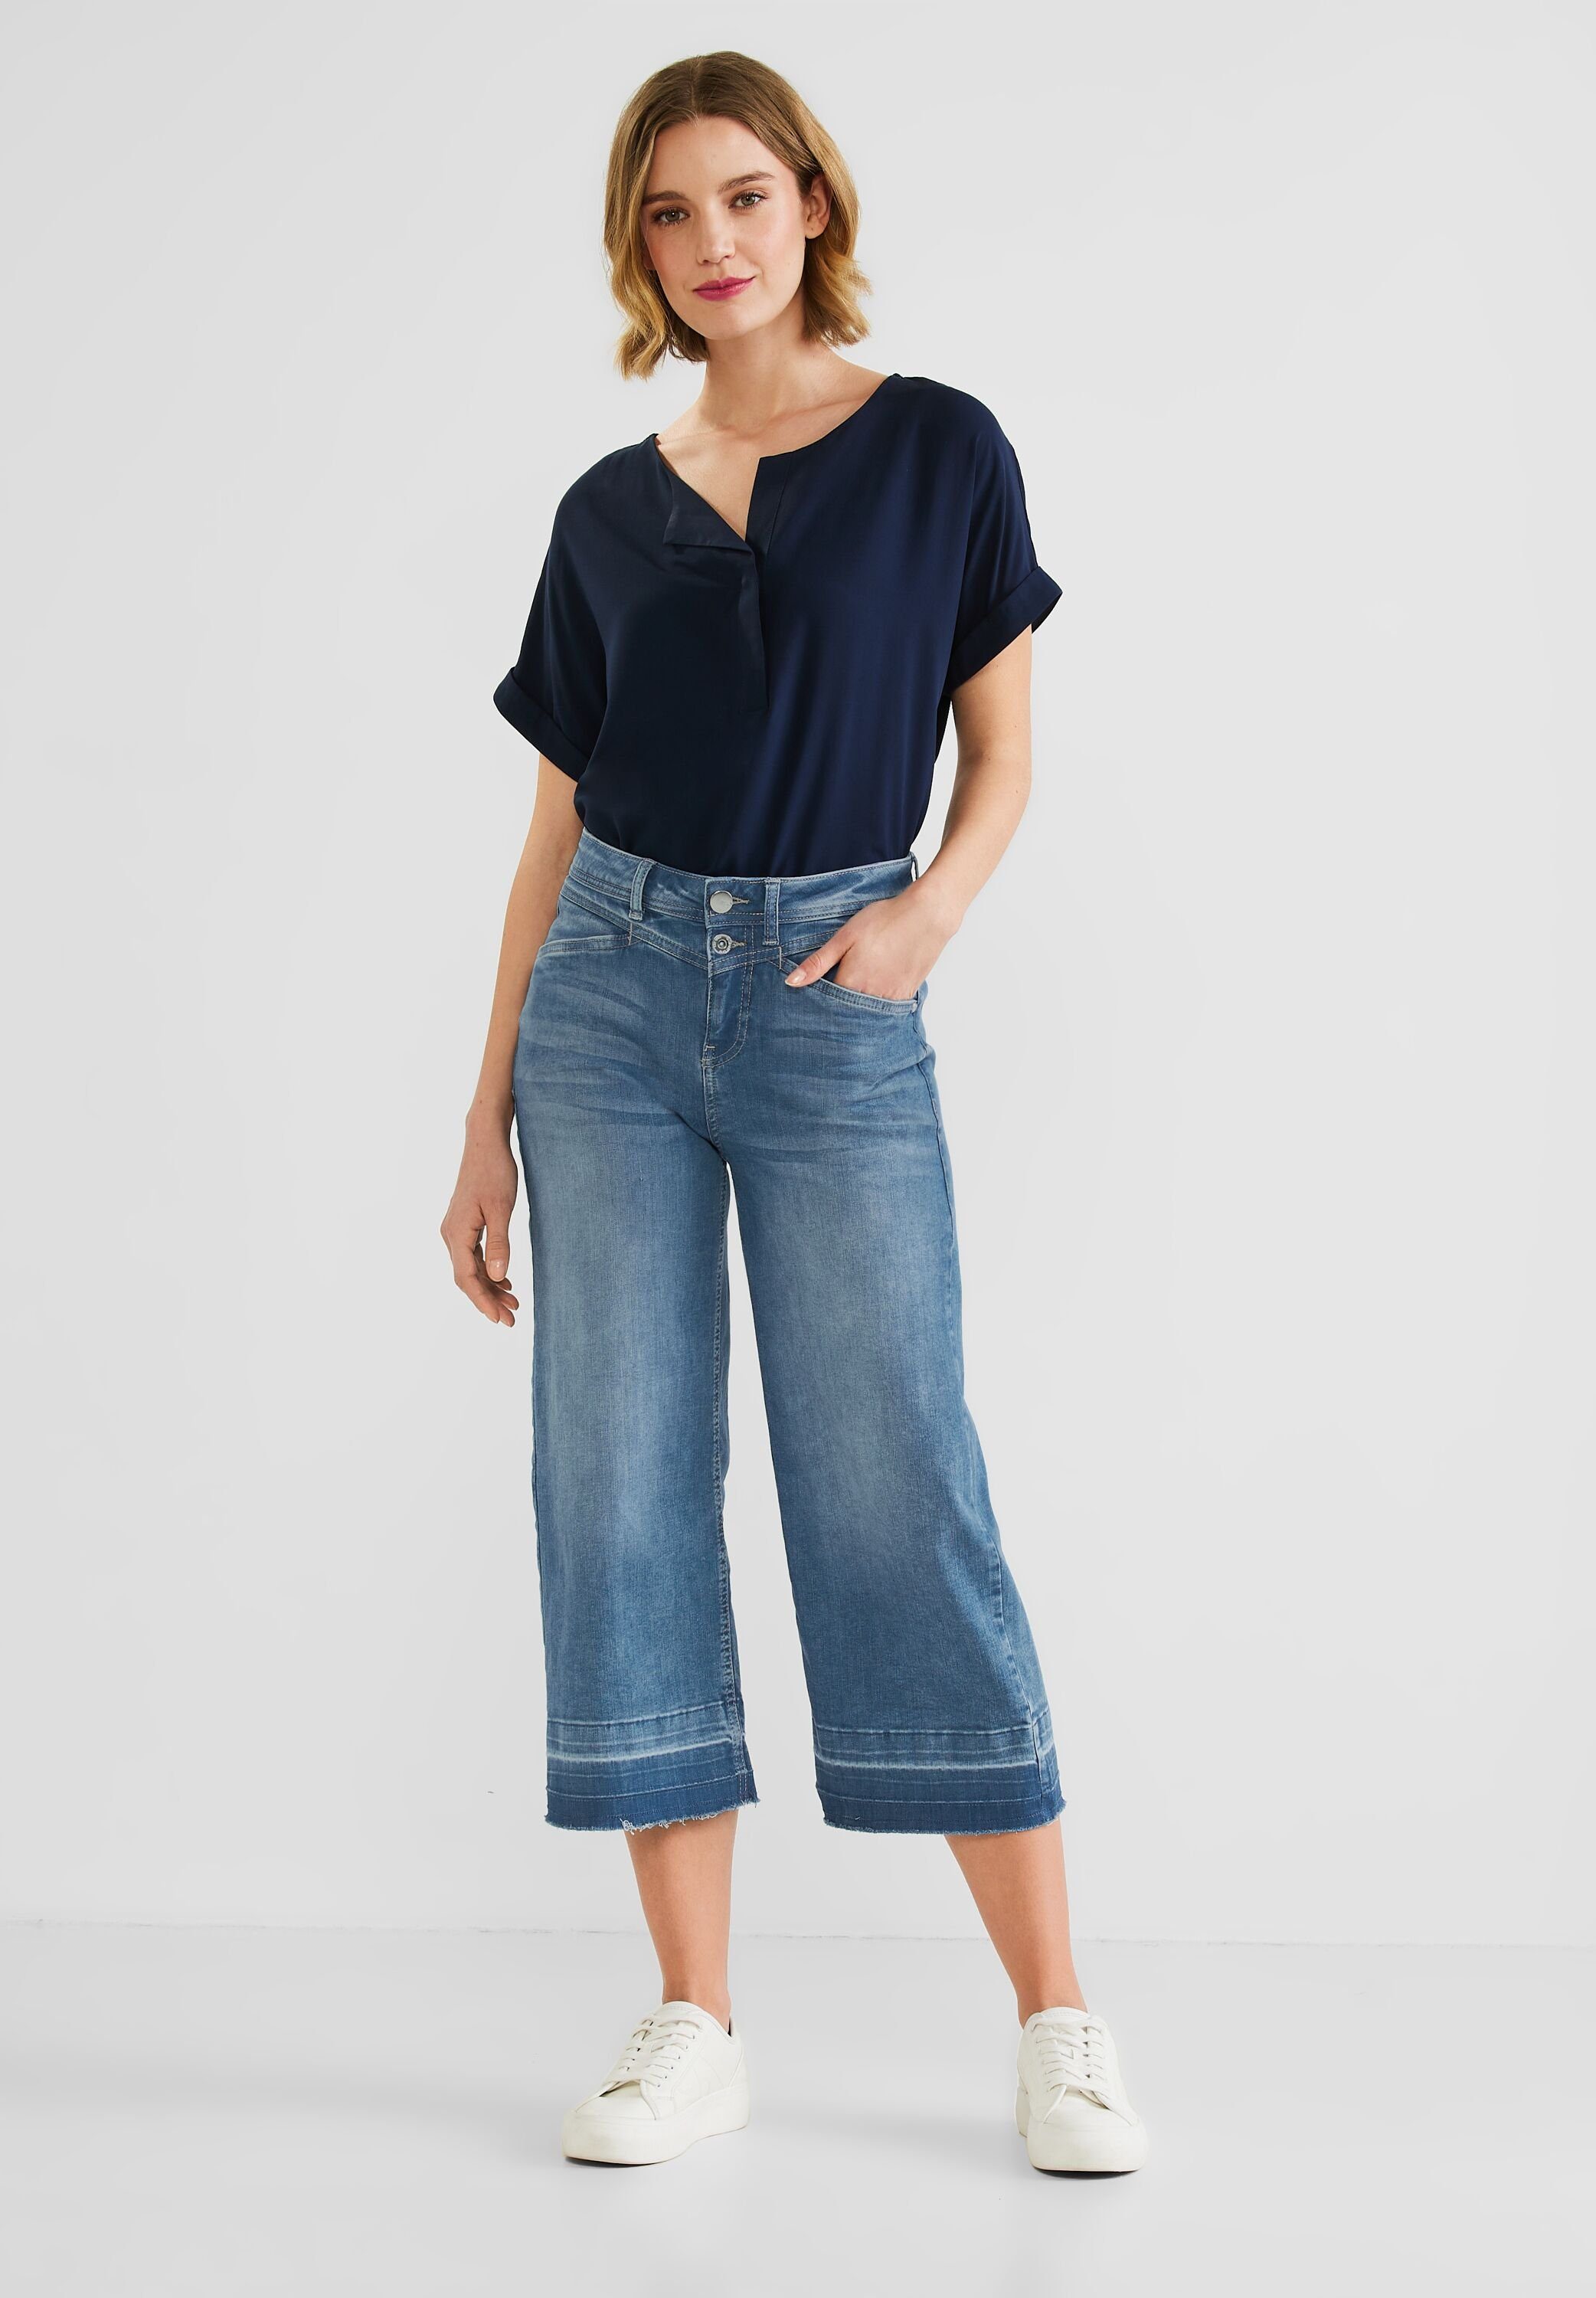 Wa in ONE Vorhanden Casual STREET Sky Bequeme Blue Jeans Culotte Nicht Street One Jeans Fit (1-tlg)